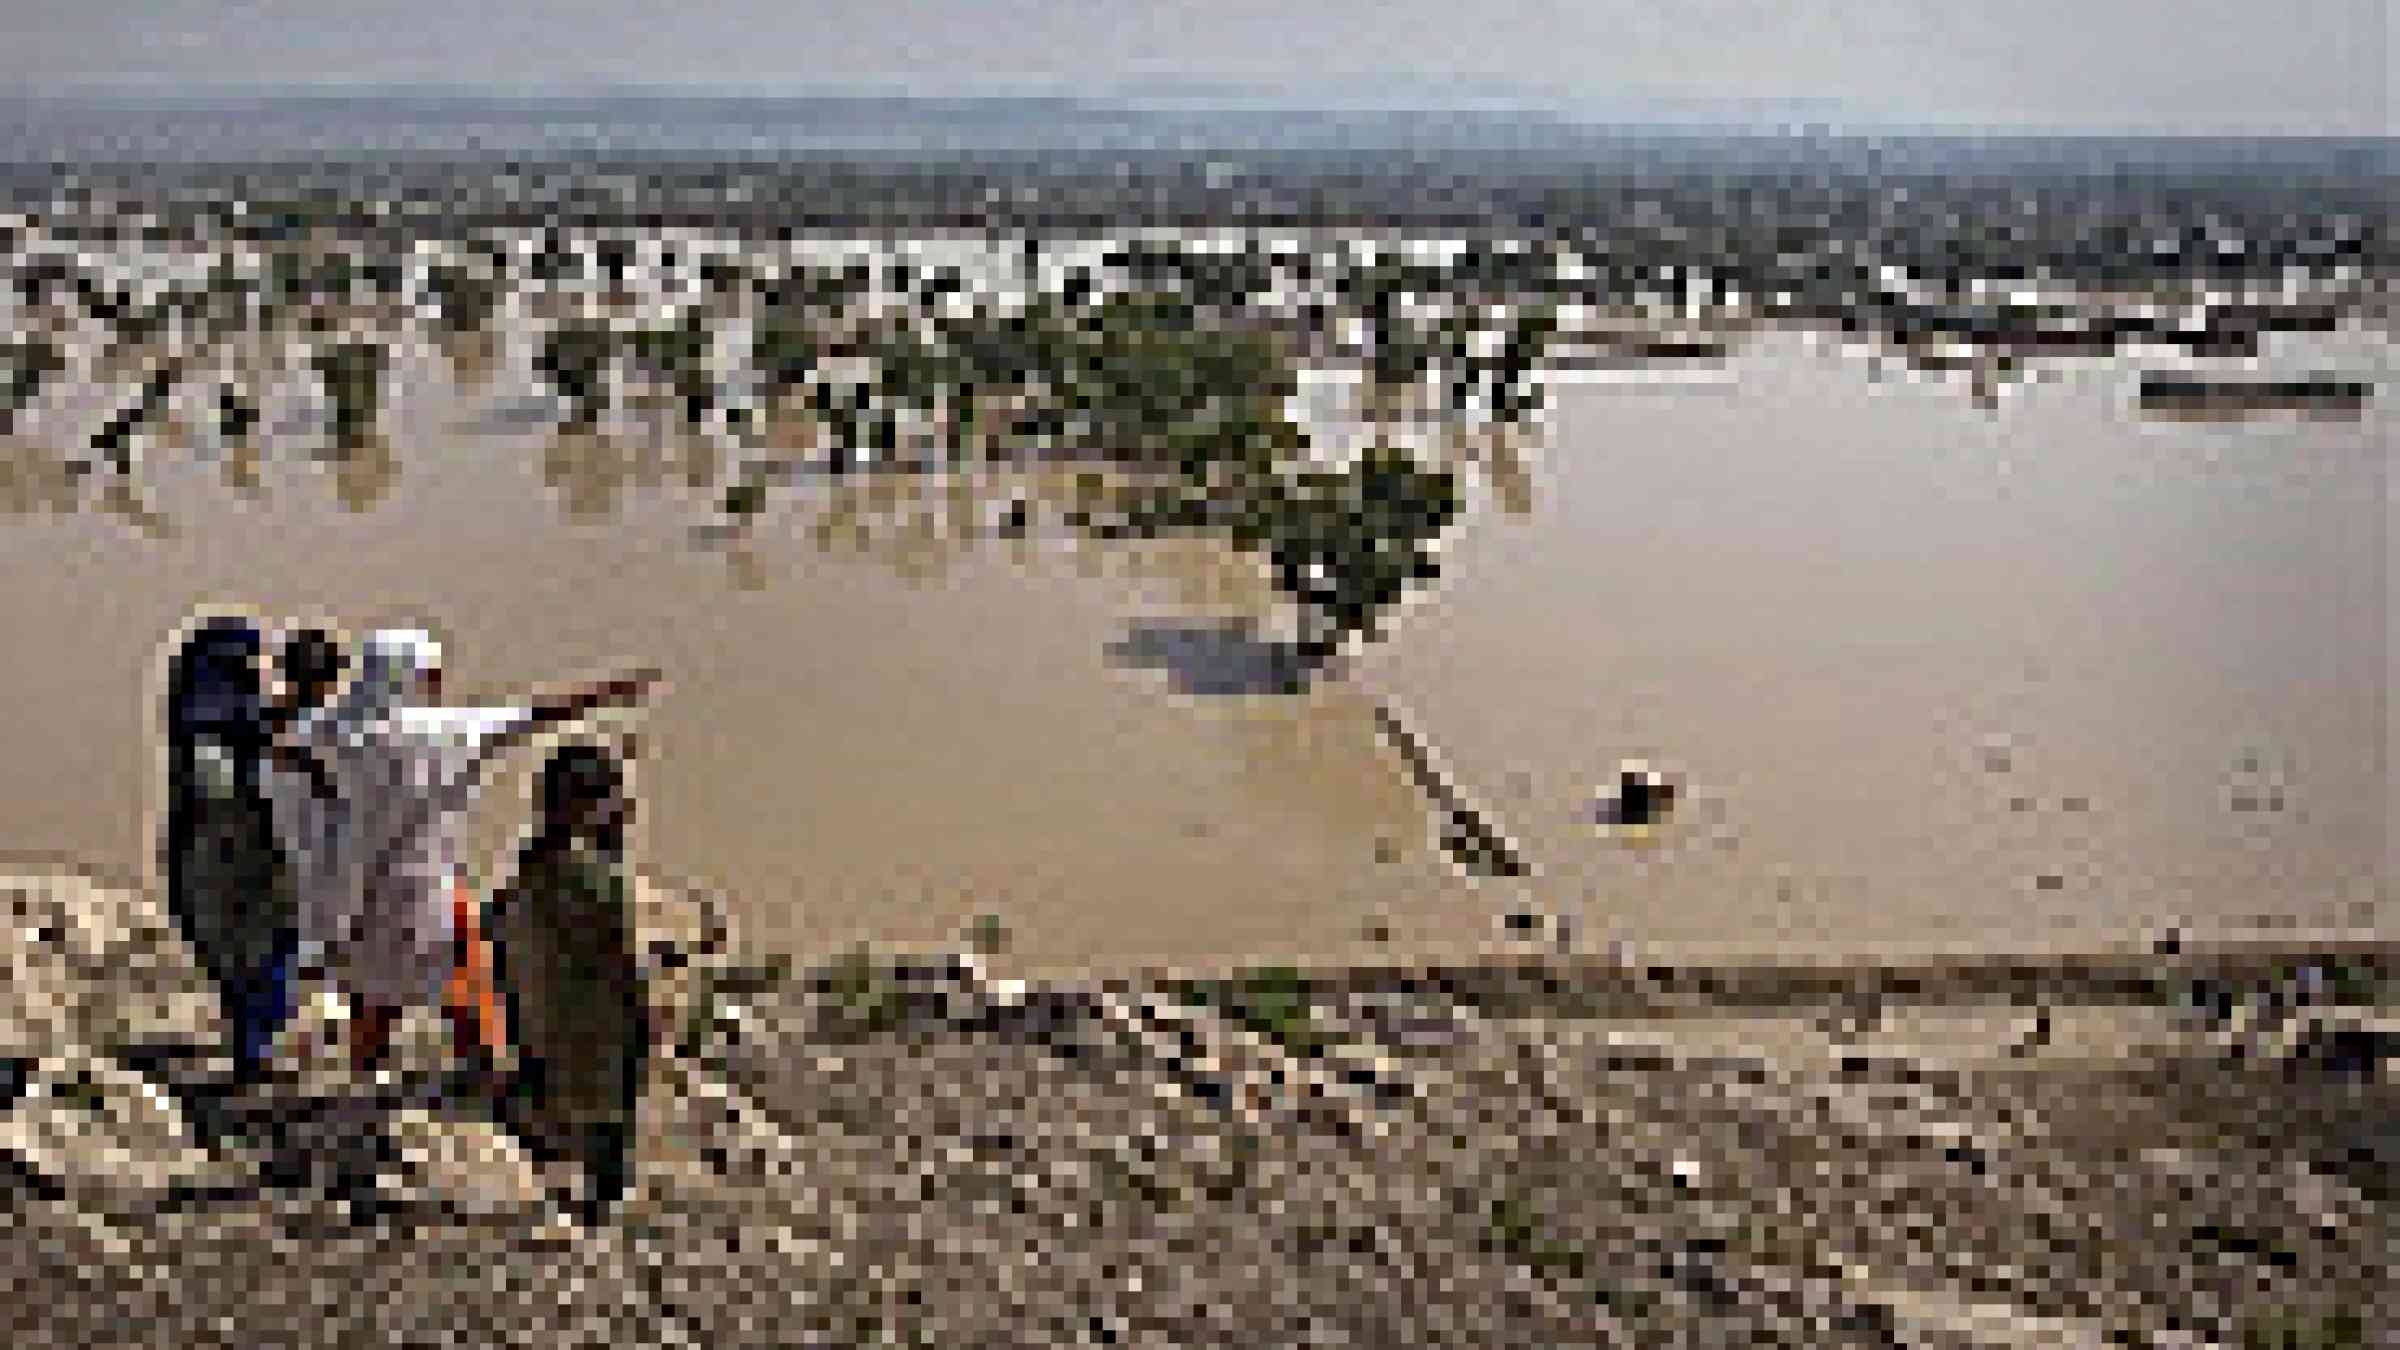 Aftermath of floods in Pakistan. Copyright Oxfam